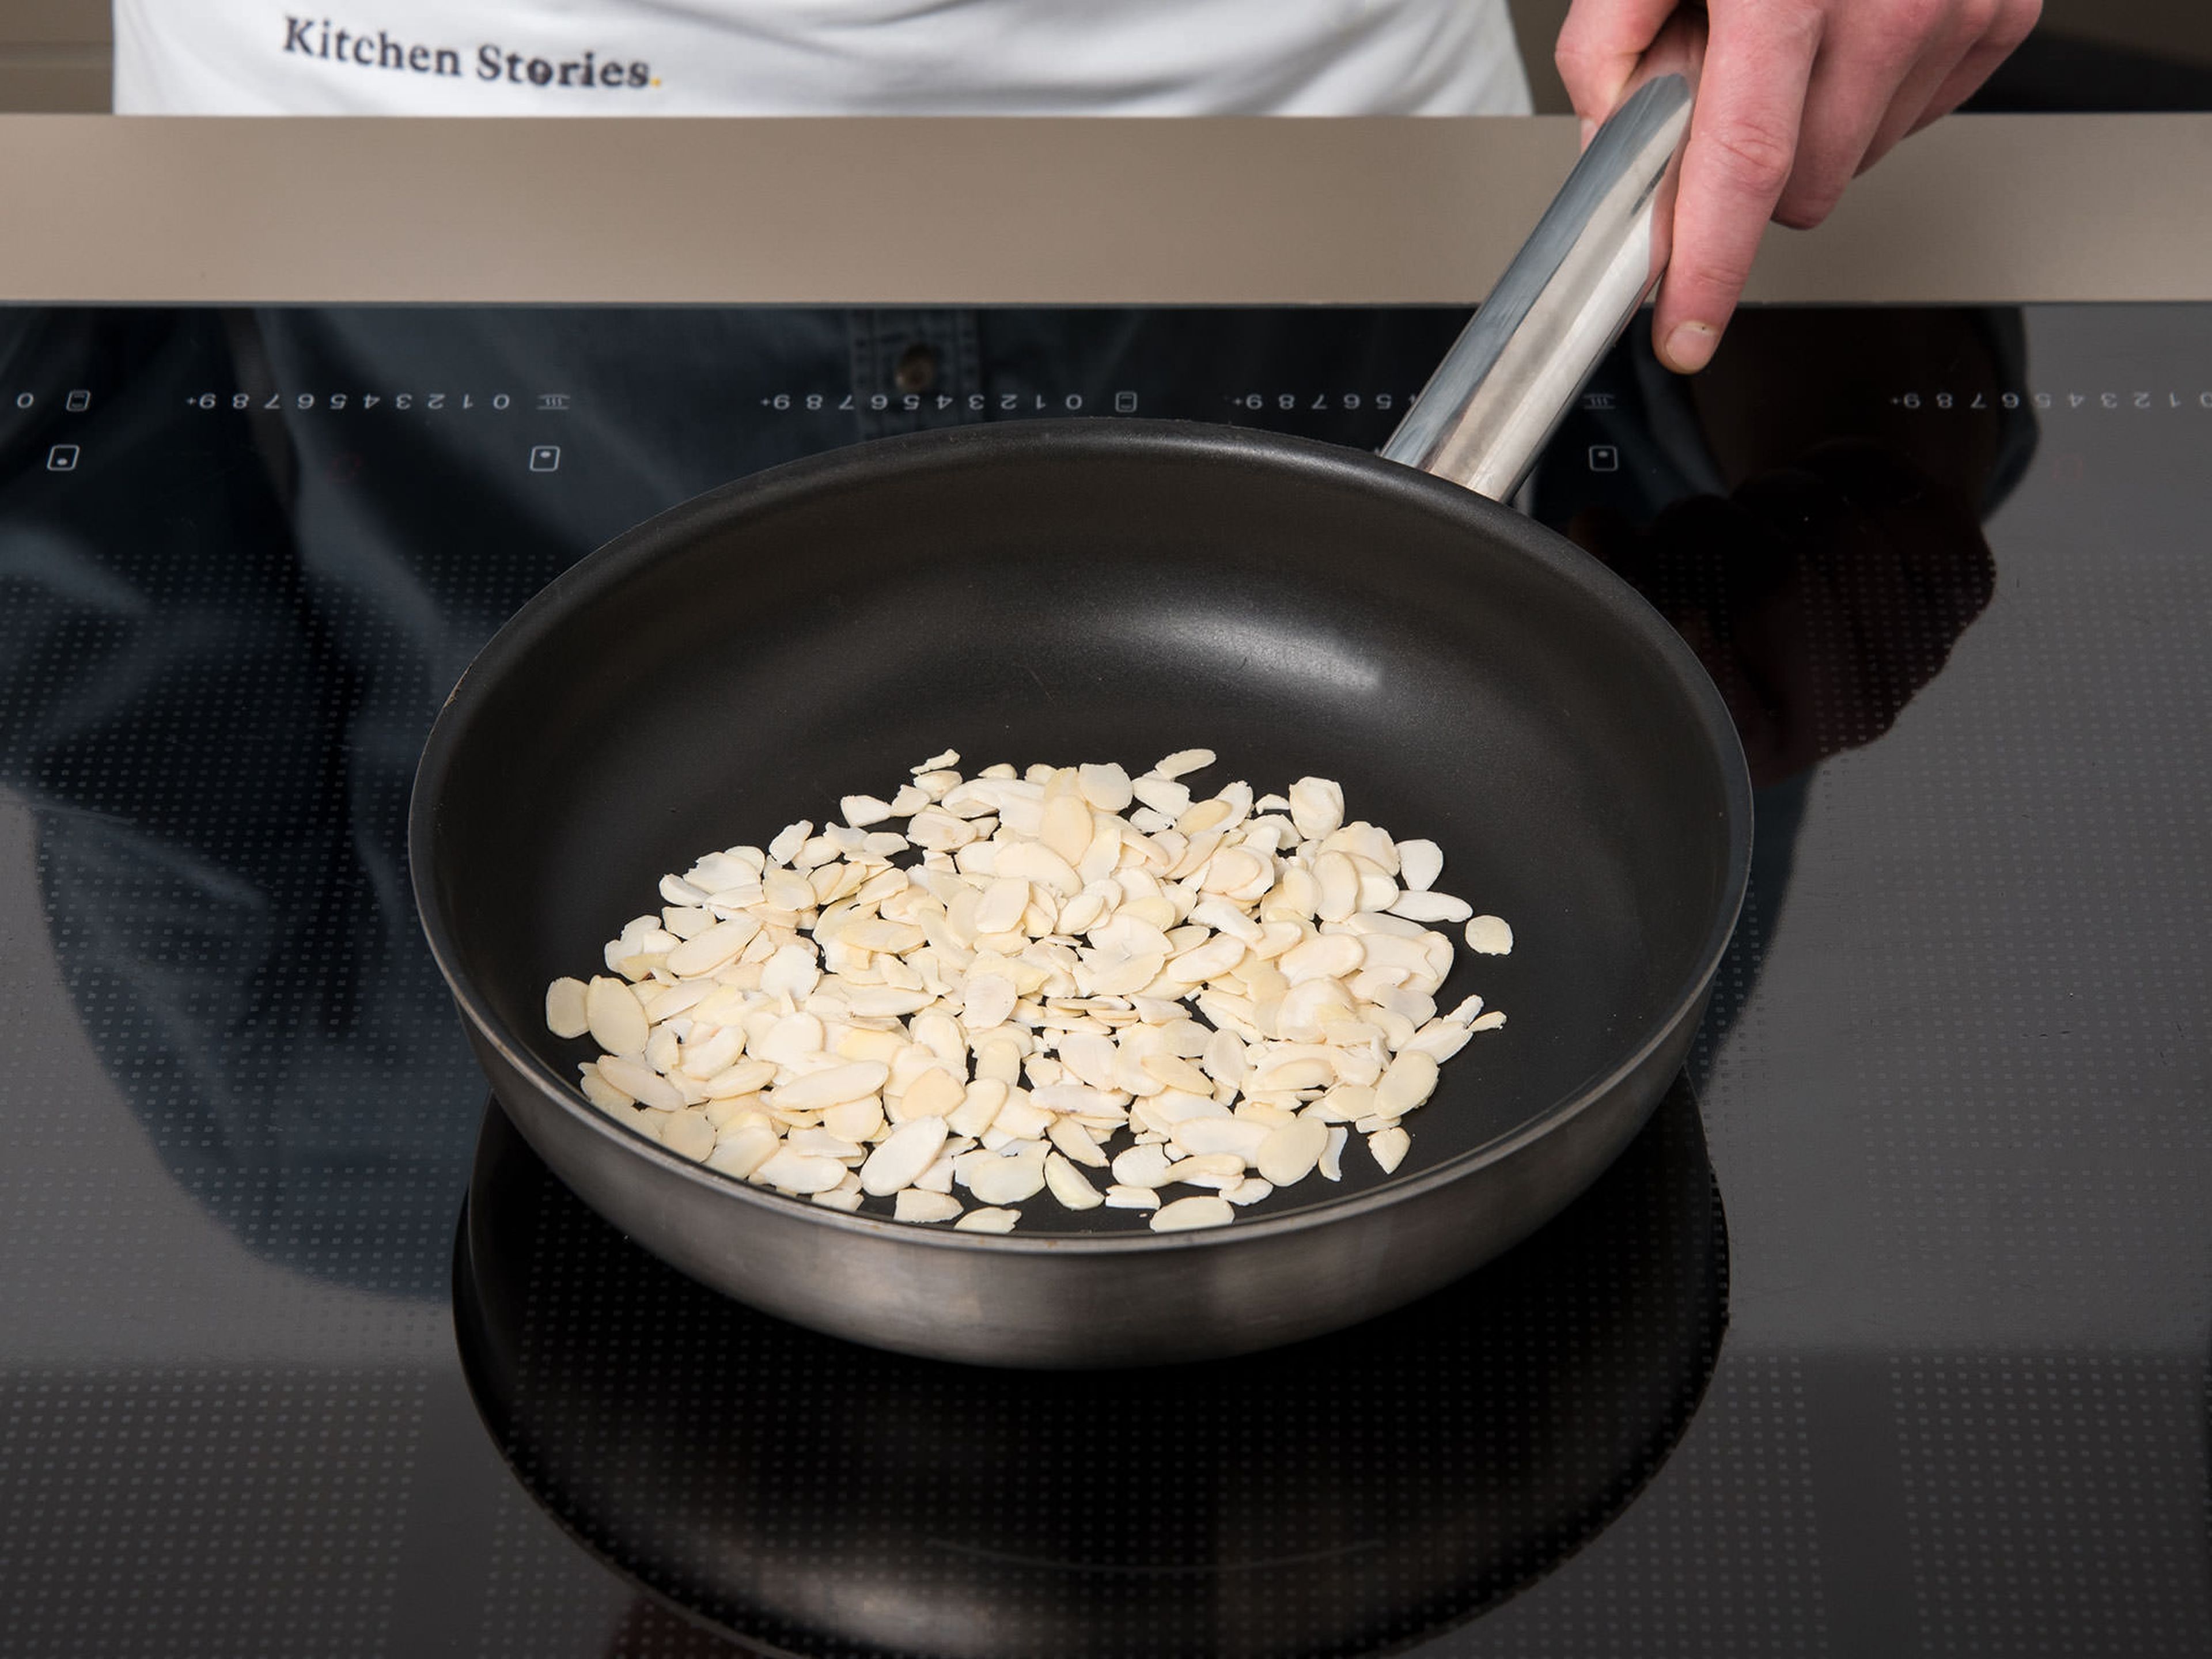 Roast sliced almonds in a frying pan for approx. 3 – 4 min., or until golden brown.